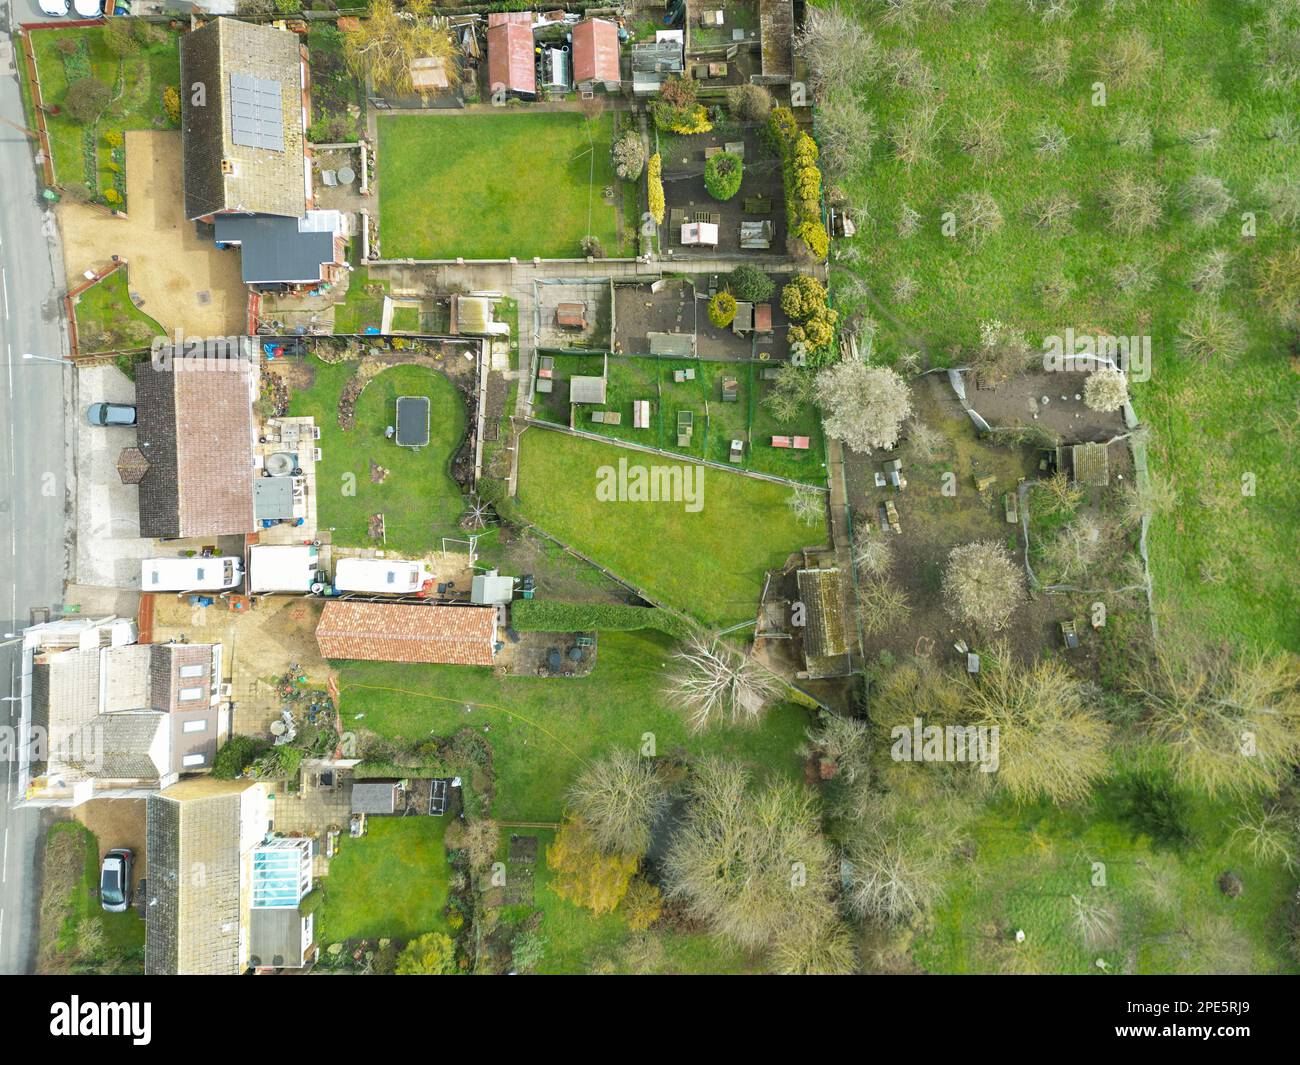 Top down view of a mixture of old and modern houses and bungalows seen at the edge of an East Anglian village. Note the orchard on the far right. Stock Photo